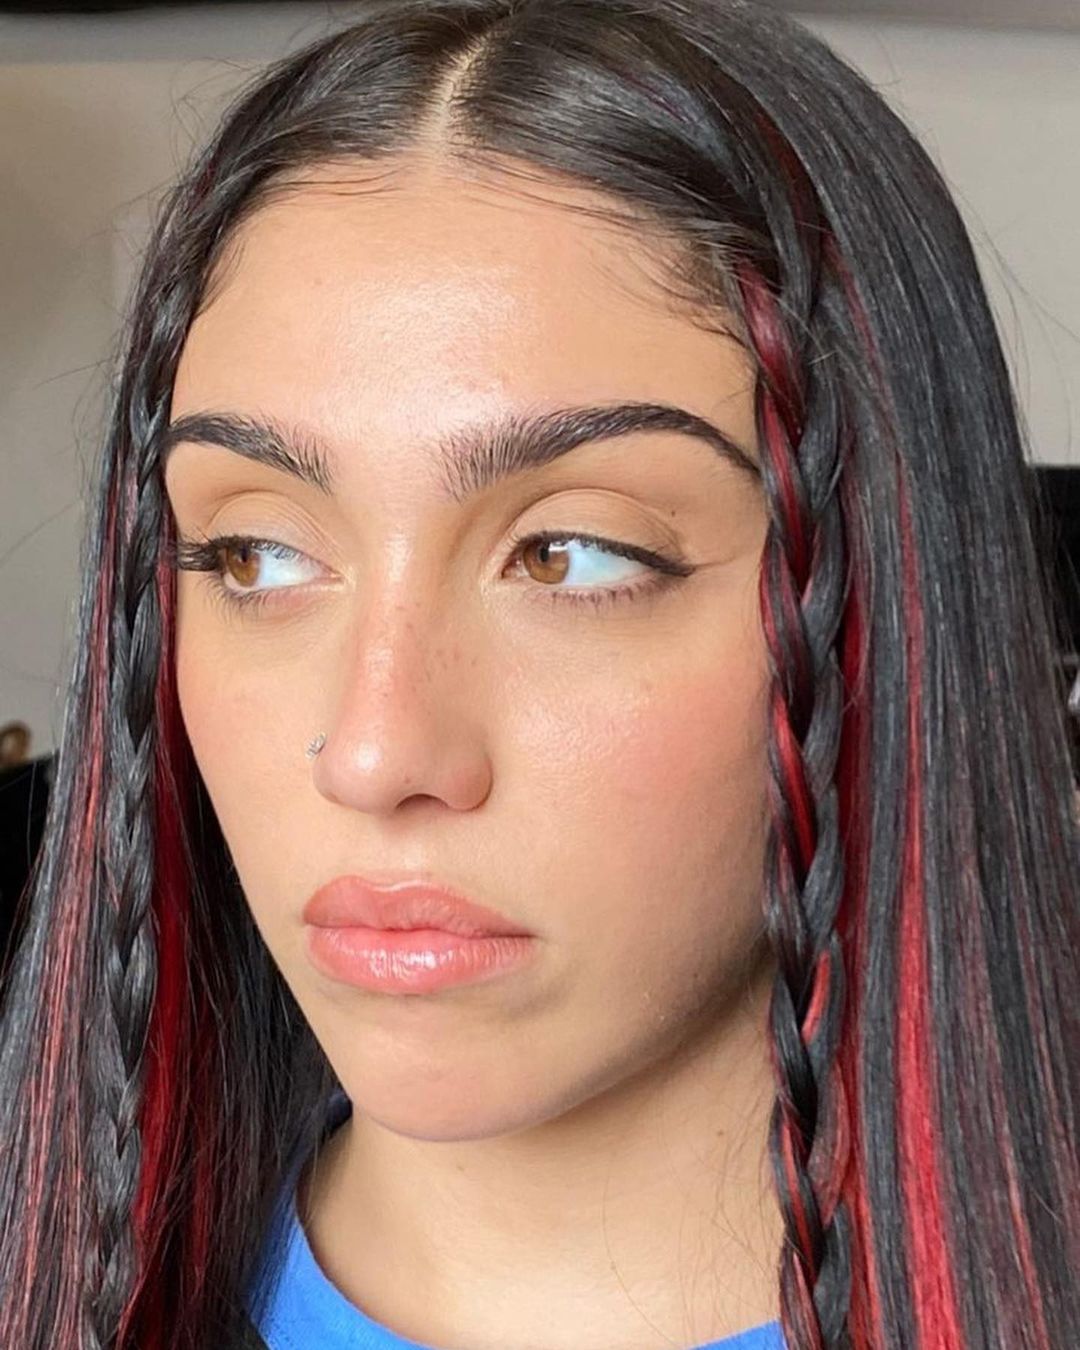 Lourdes Leon West Age, Height, Wife, Family – Biographyprofiles